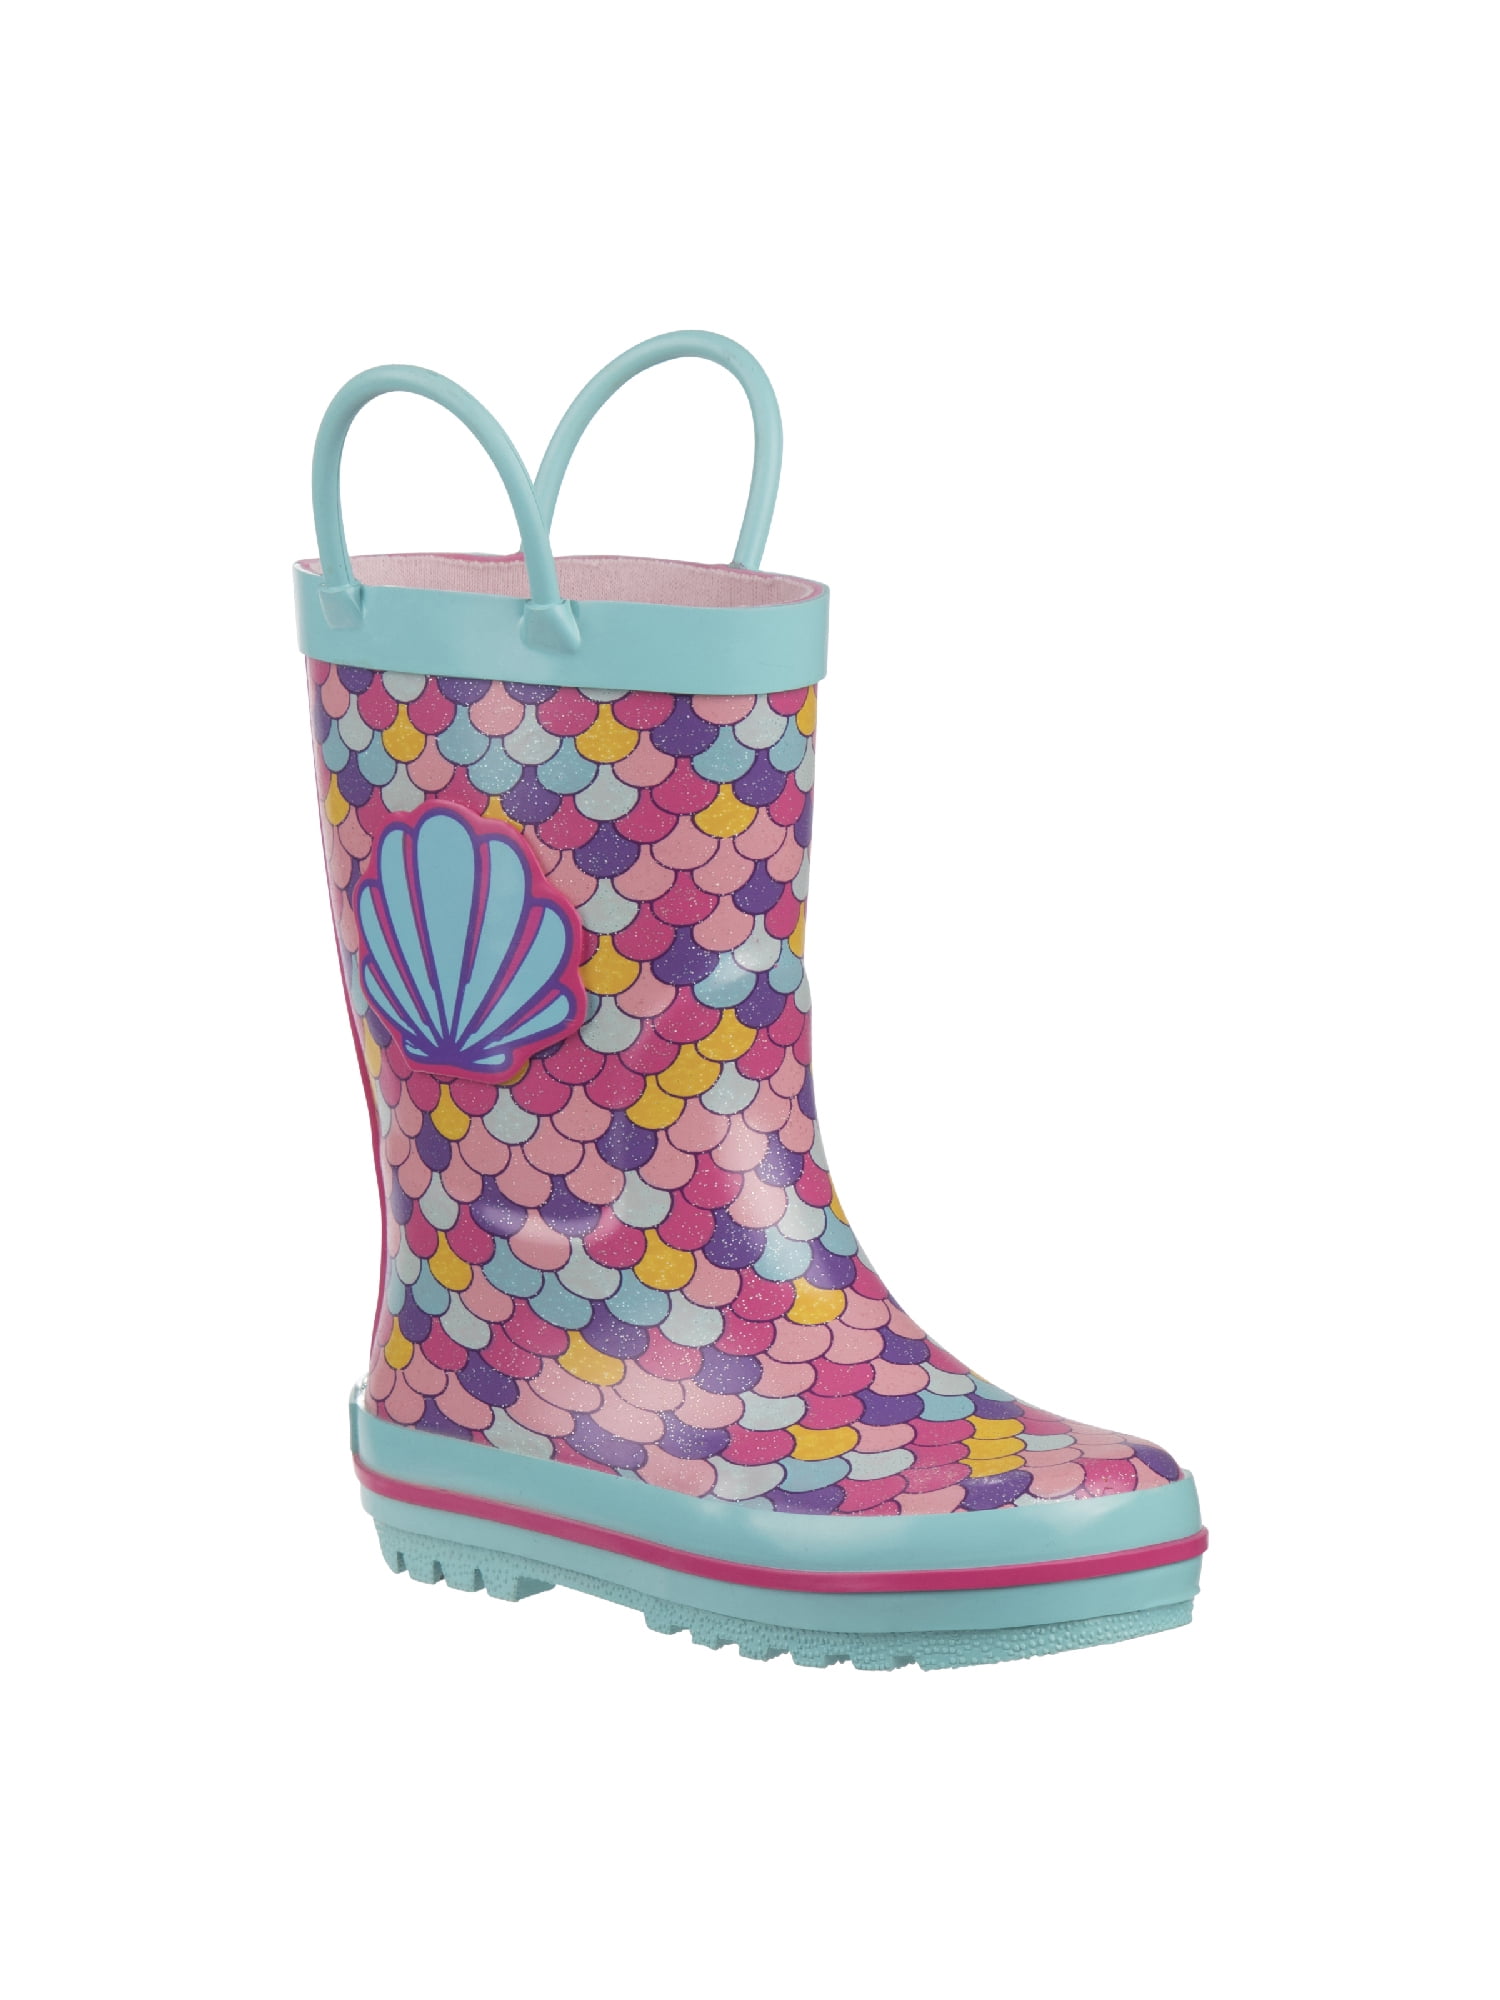 Forever Young Kids Rubber Lace Up Heart Print Rainboots 